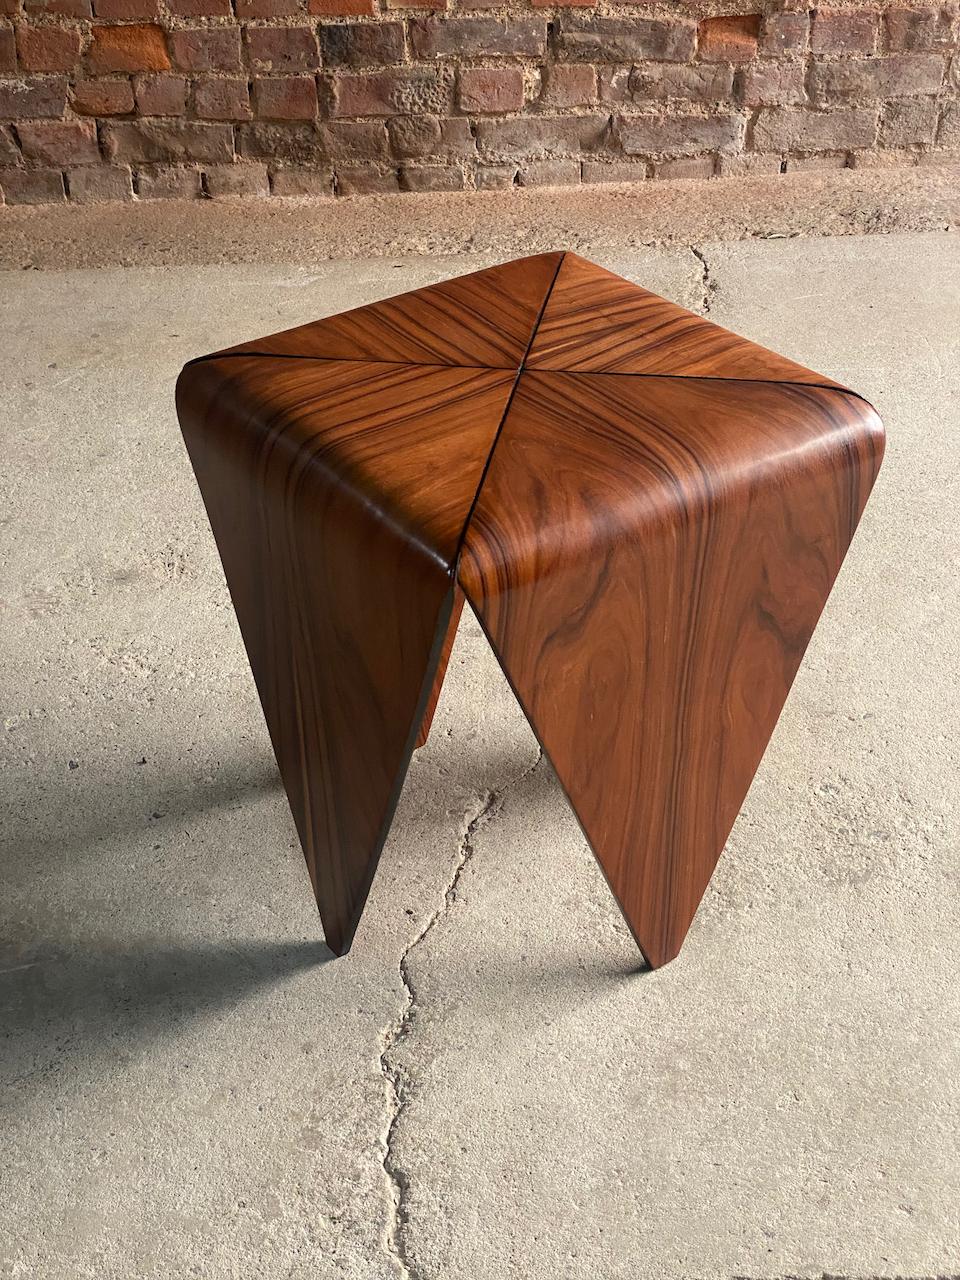 Jorge Zalszupin Petalas Side Table by L' Atelier circa 1960

Magnificent mid century Jorge Zalszupin ‘Petalas' Pau Ferro (Iron Wood) side table manufactured by L' Atelier Brazil Sao Paolo circa 1960, the Petalas design was inspired by the folded